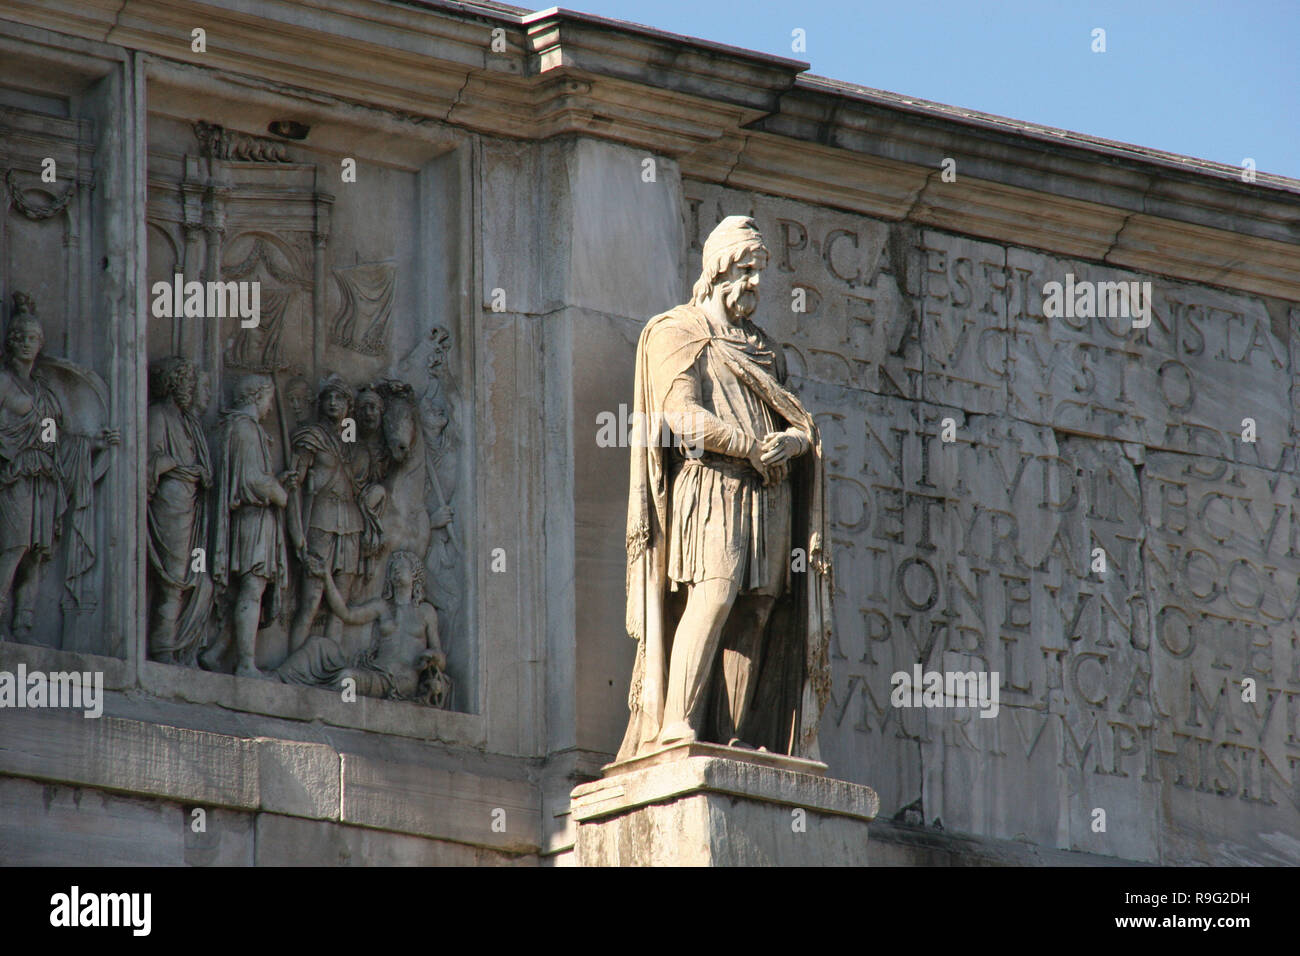 Roman Art. Arch of Constantine. Triumphal arch. It was erected to commemorate  Constantine victory over Maxentius at the Batlle of Milvian Bridge (October 28, 312). Reuse of parts of earlier buildings. Statue of a barbarian (Trajan period pieces, reused). IV century AD. Rome. Italy. Europe. Stock Photo